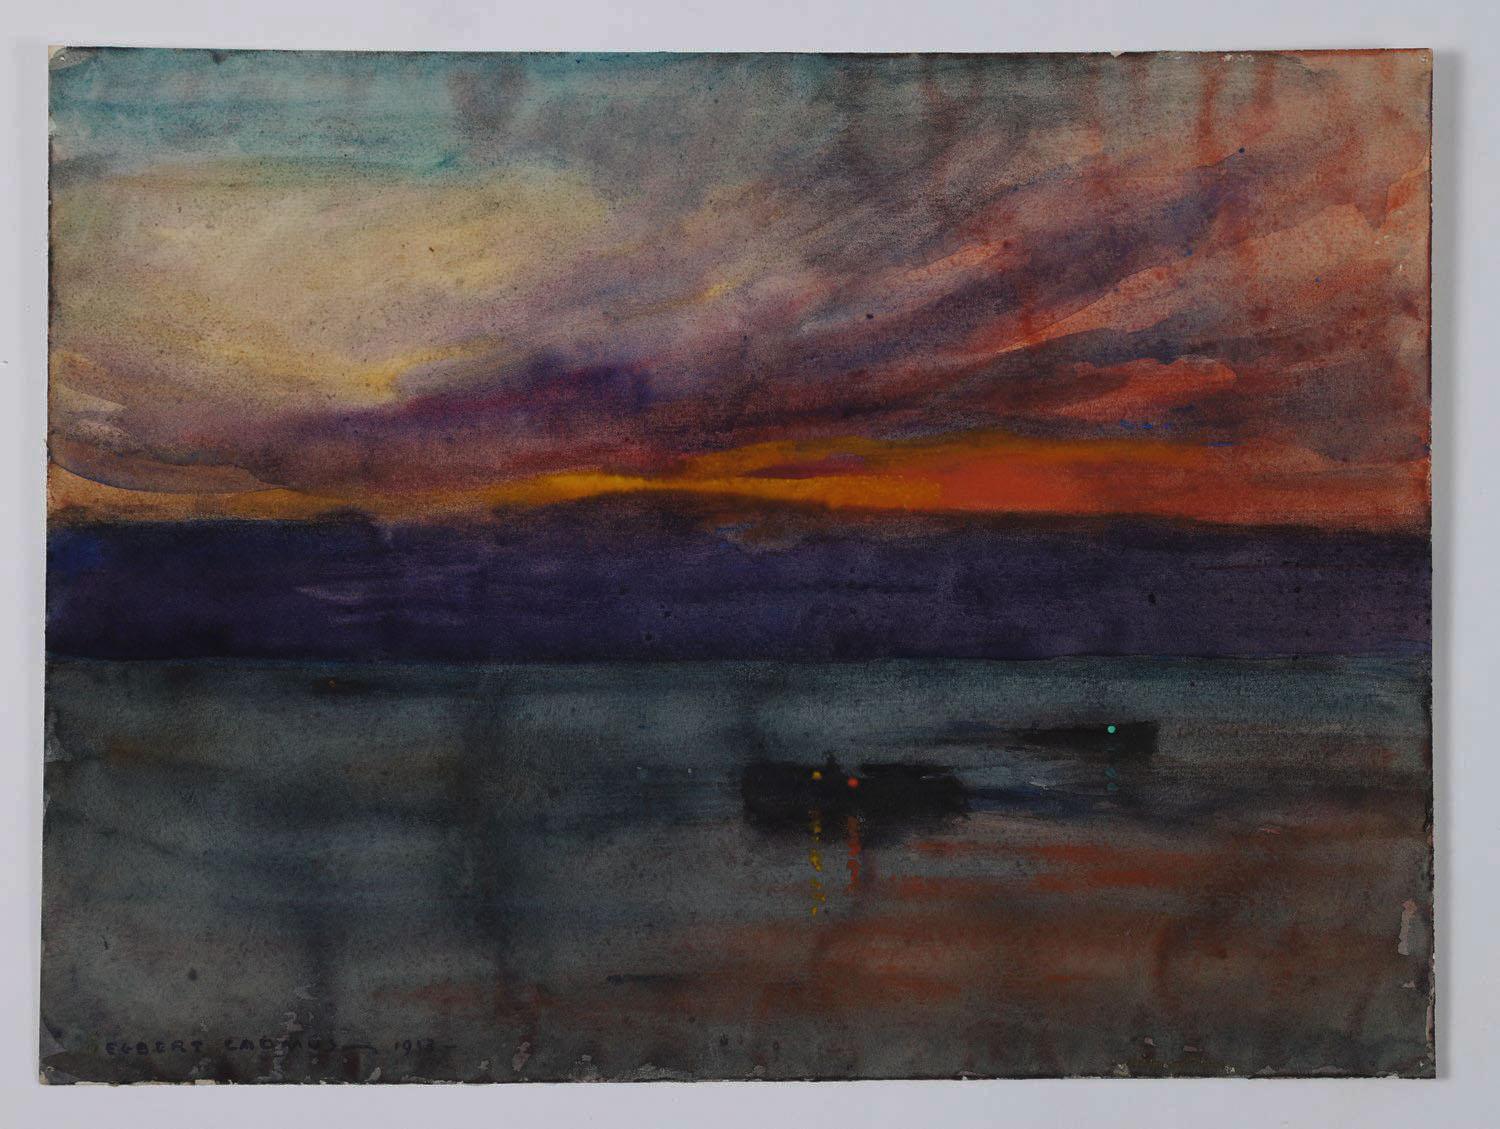 North American Antique 1913 Egbert Cadmus Evening Hudson River Watercolor Painting For Sale